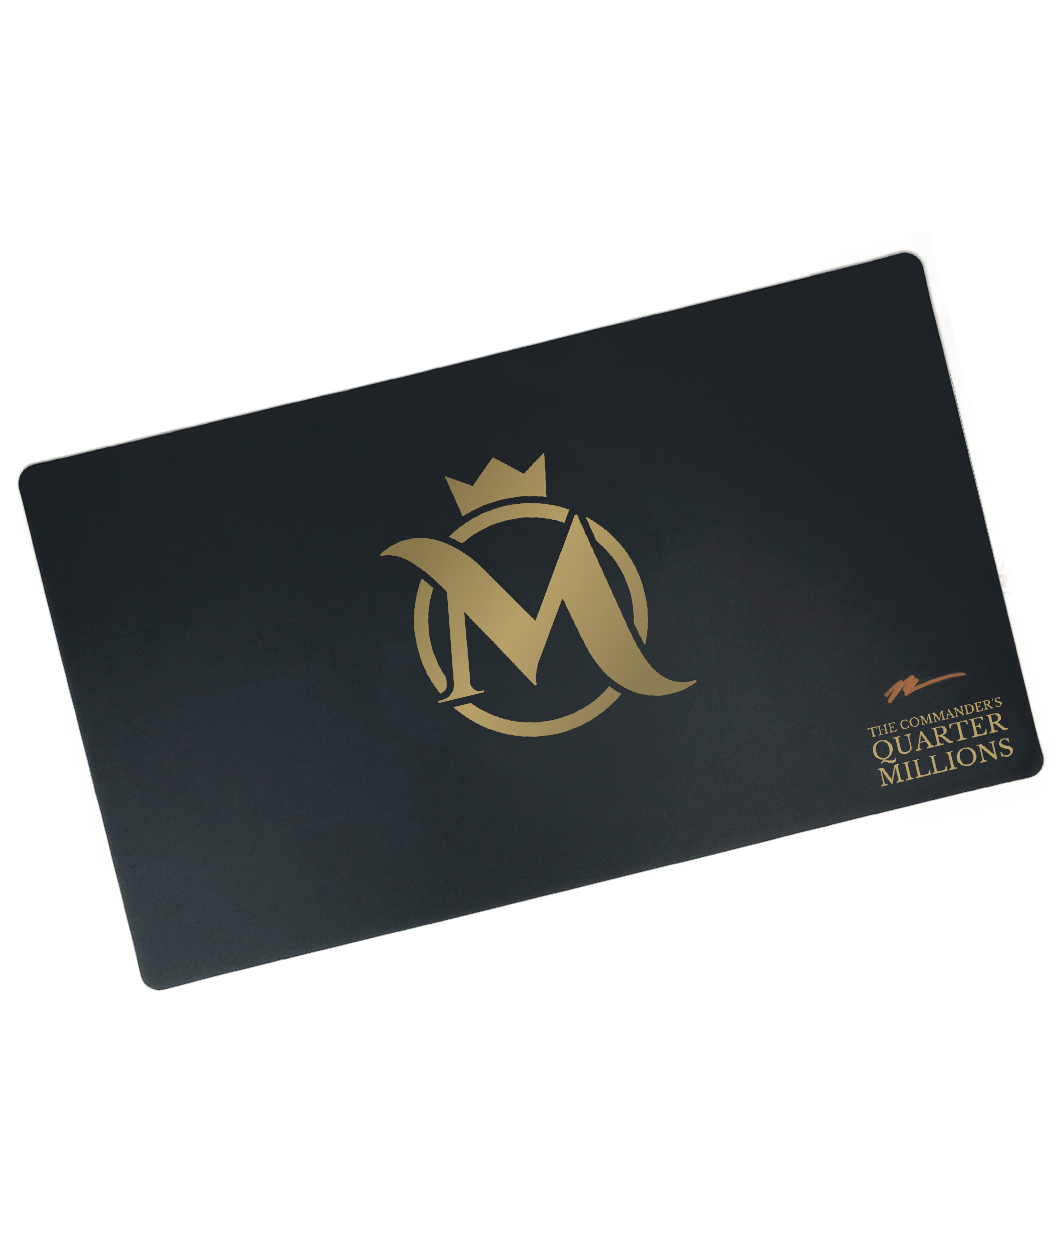 A black rectangular playmat with curved edges. In the center, a gold stylized M is in front of a gold circle. A gold crown is above. “The Commander’s Quarter Millions” is in the bottom right in gold serif font with a signature above - from the Commander’s Quarters